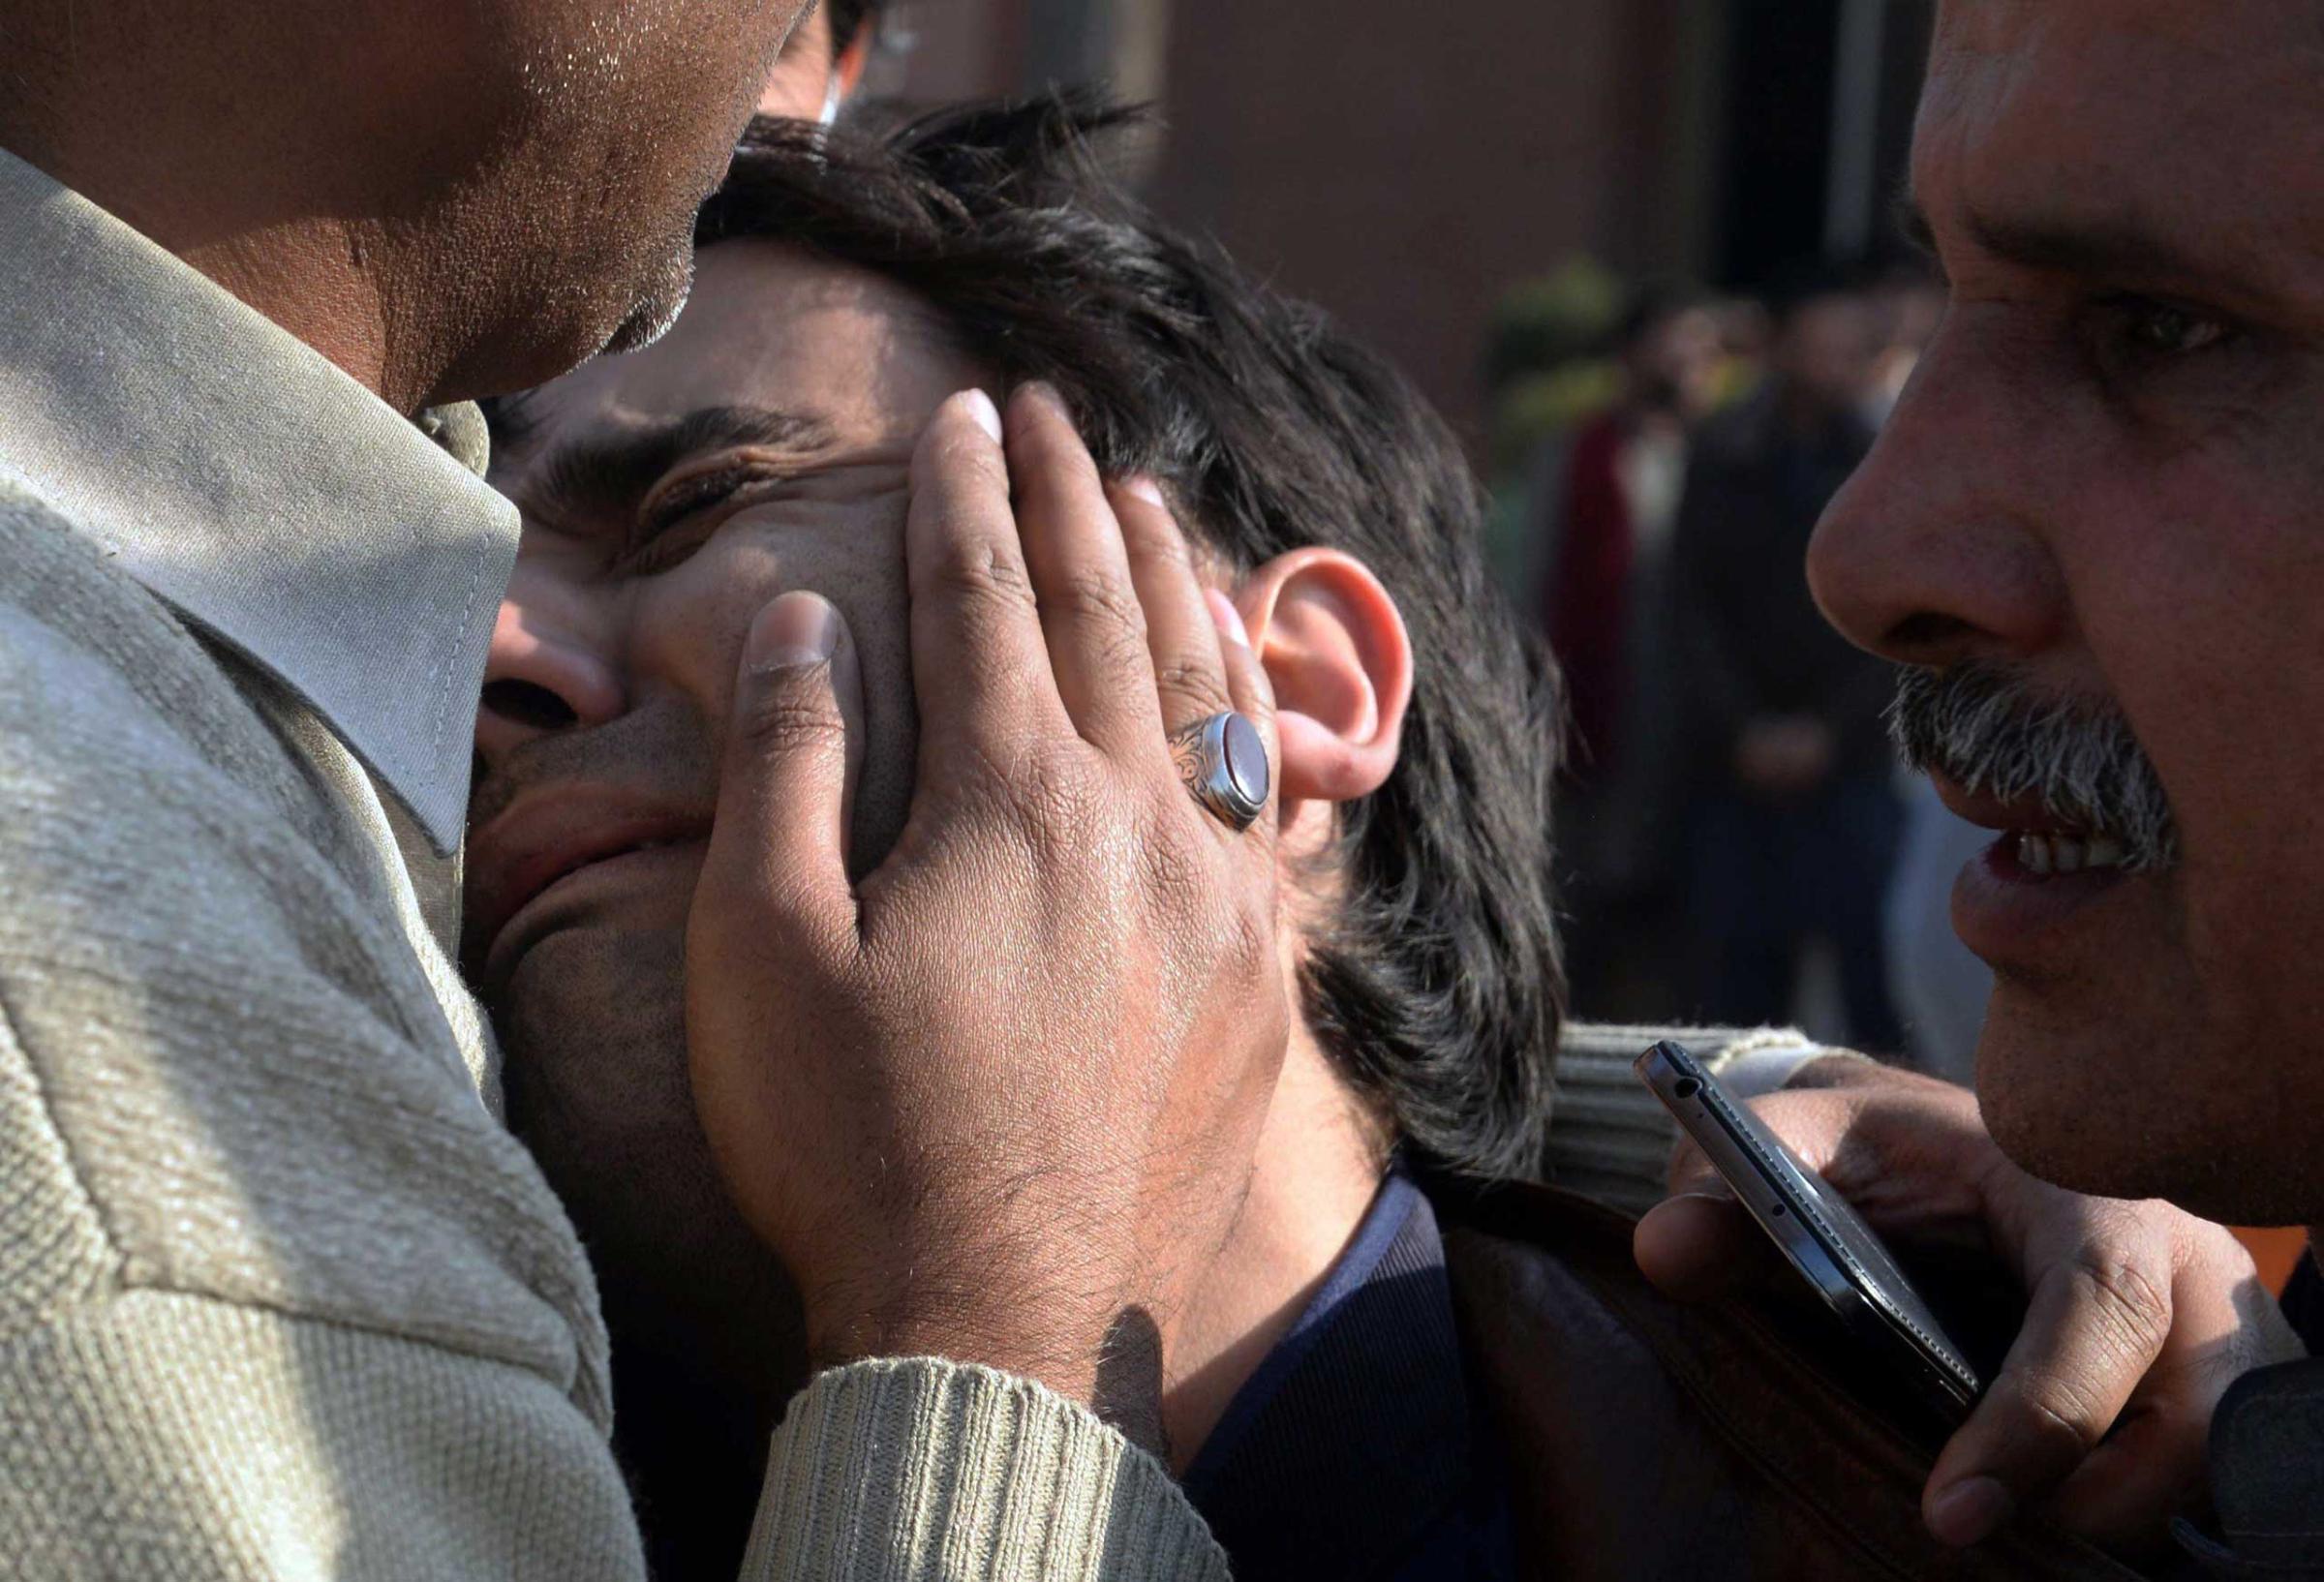 Pakistani relatives comfort a resident following an attack by Taliban militants on a Shiite Muslim mosque in Peshawar on Feb. 13, 2015.